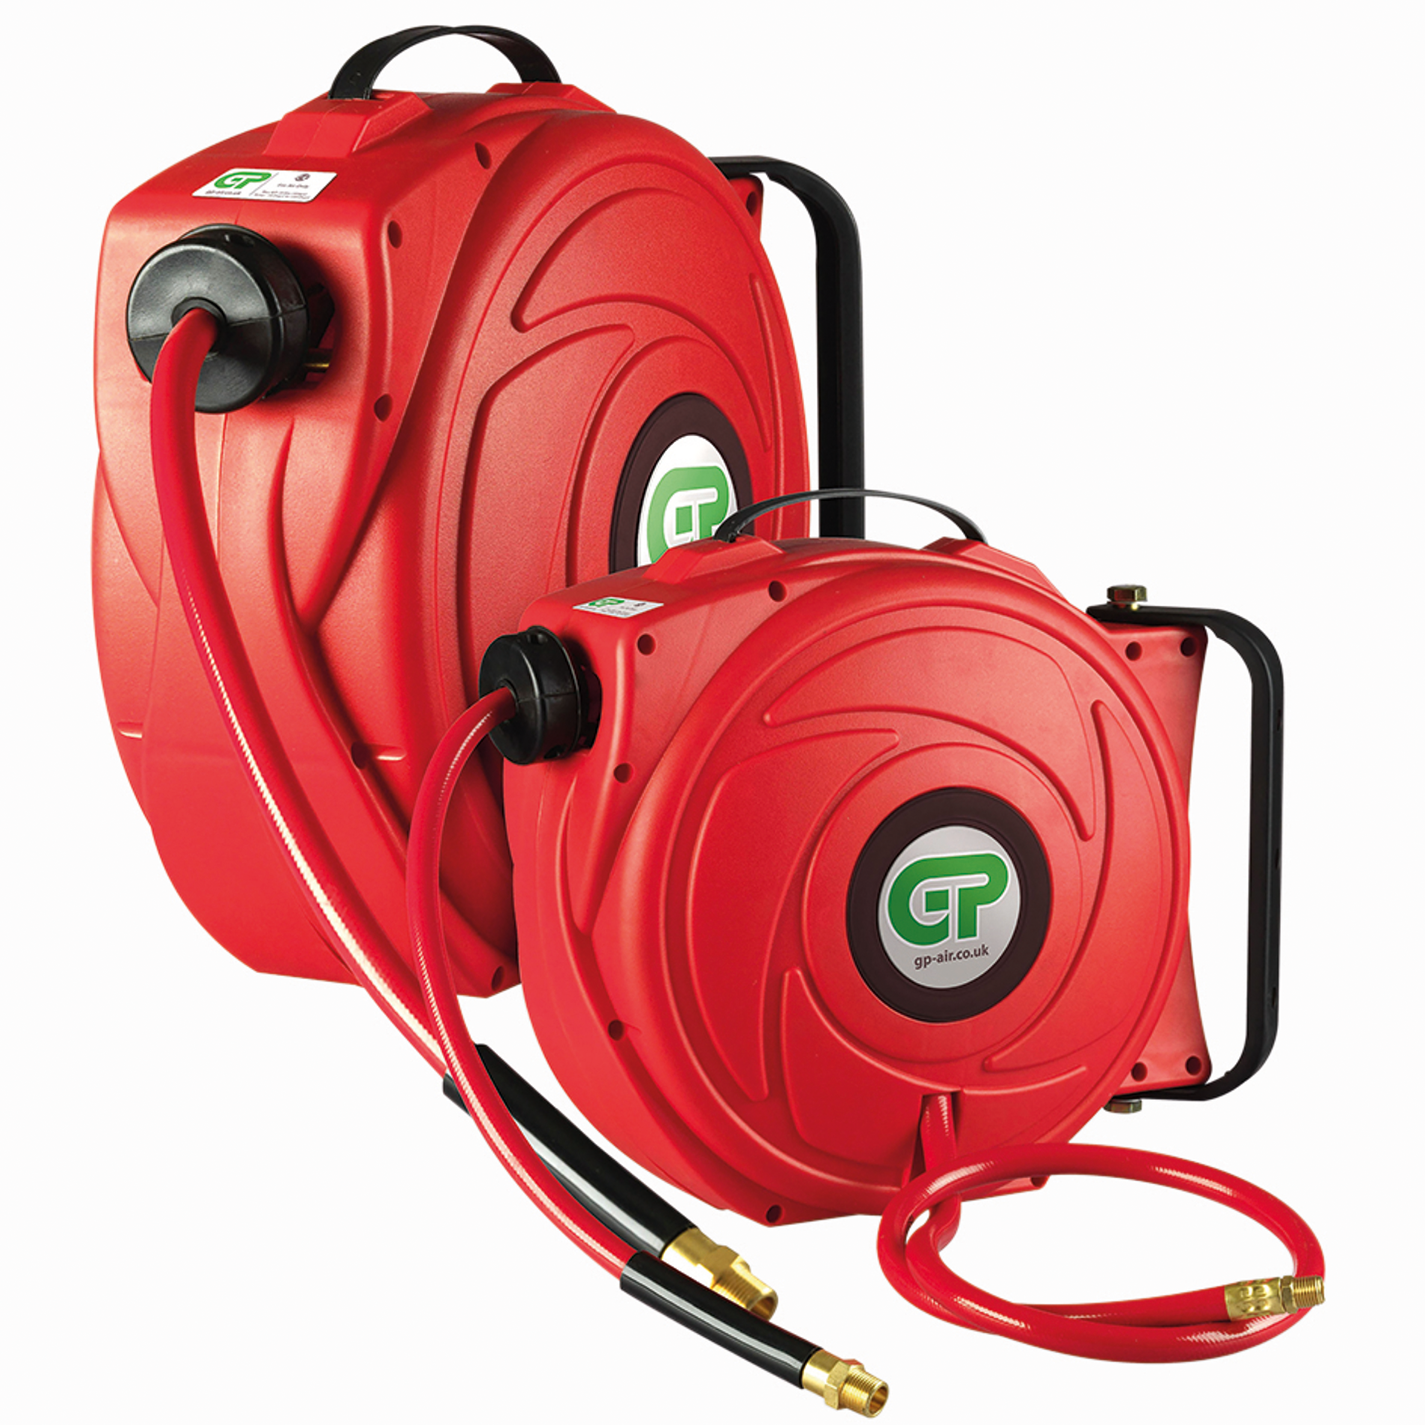 Compact Retractable Air Hose Reel comes with Hose